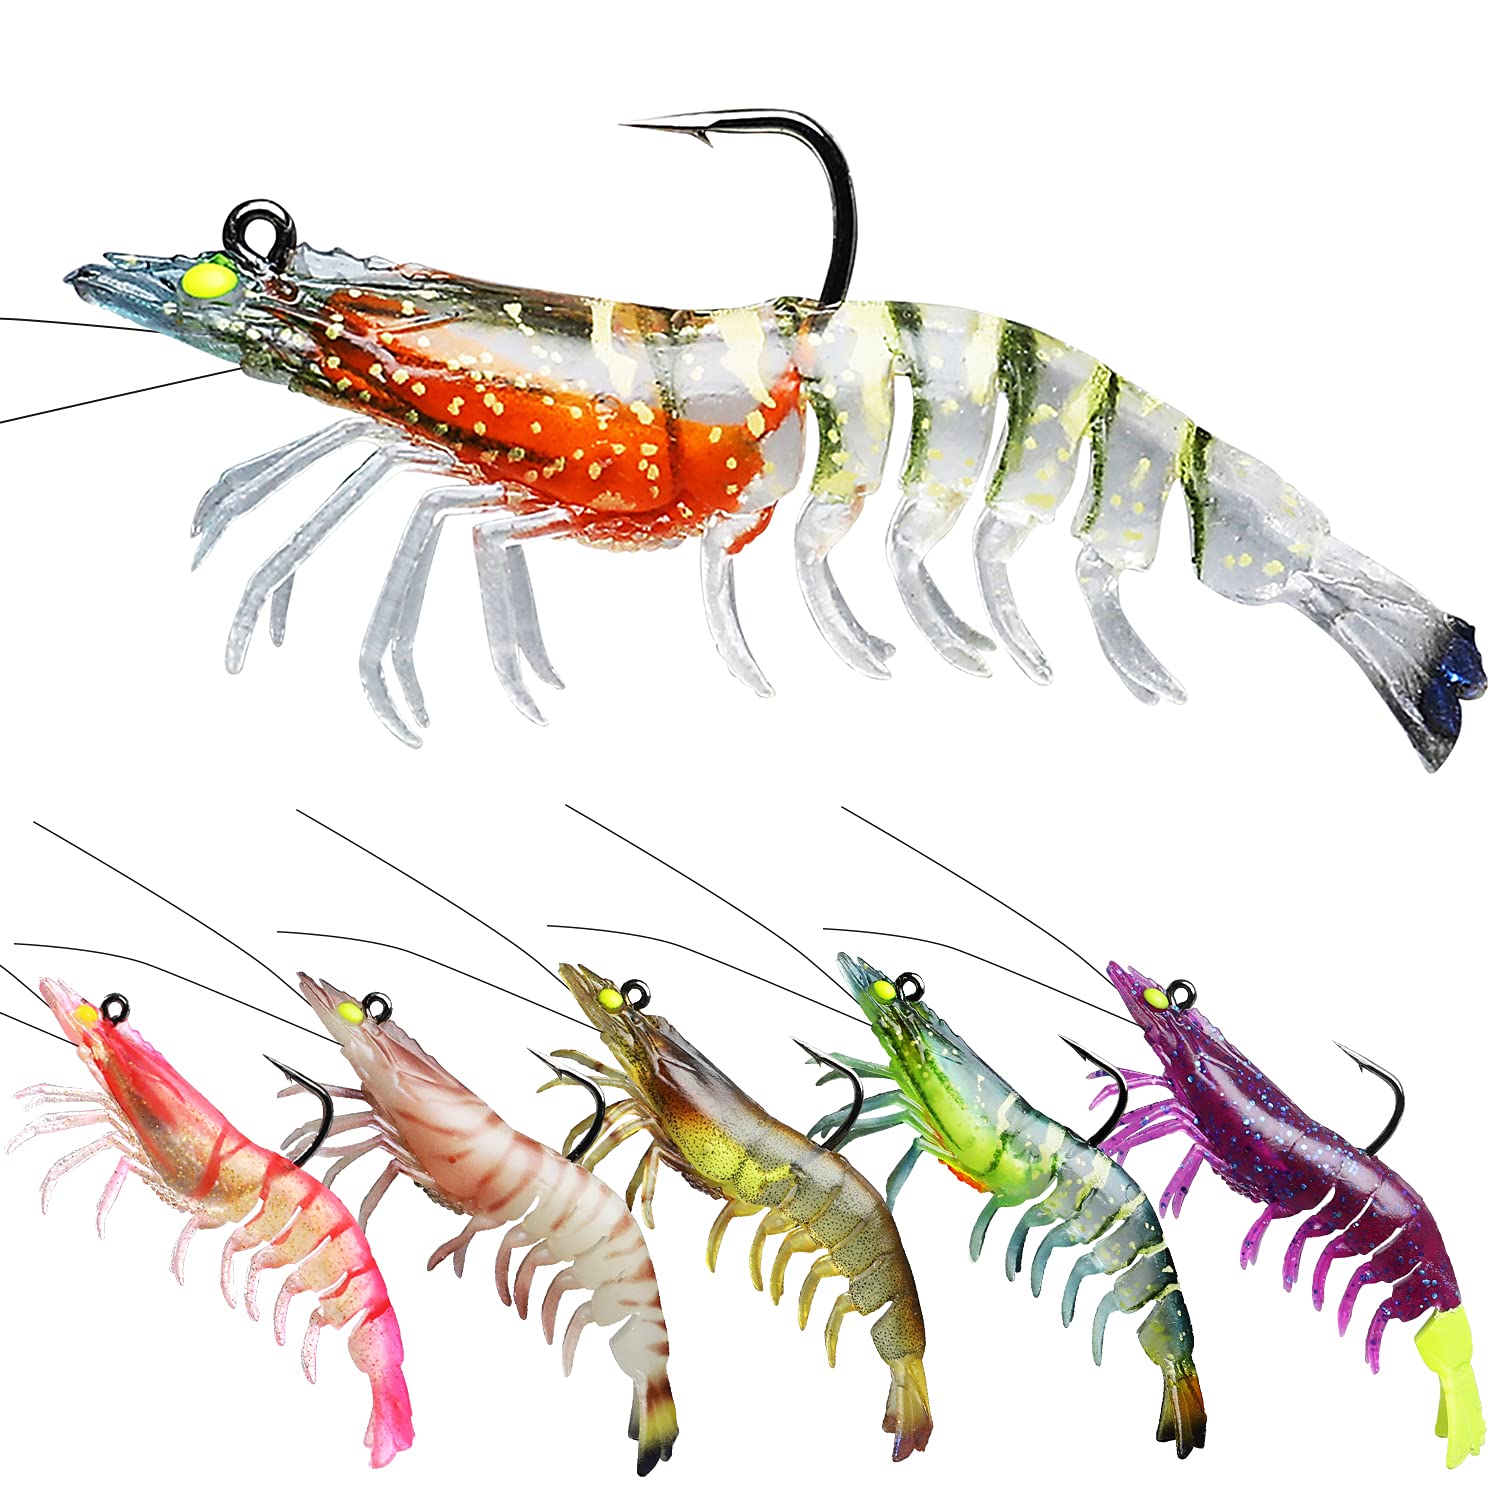 TRUSCEND Pre-Rigged Fishing Lures Premium Shrimp Lure with VMC Hook Best  Bottom Soft Swimbaits for